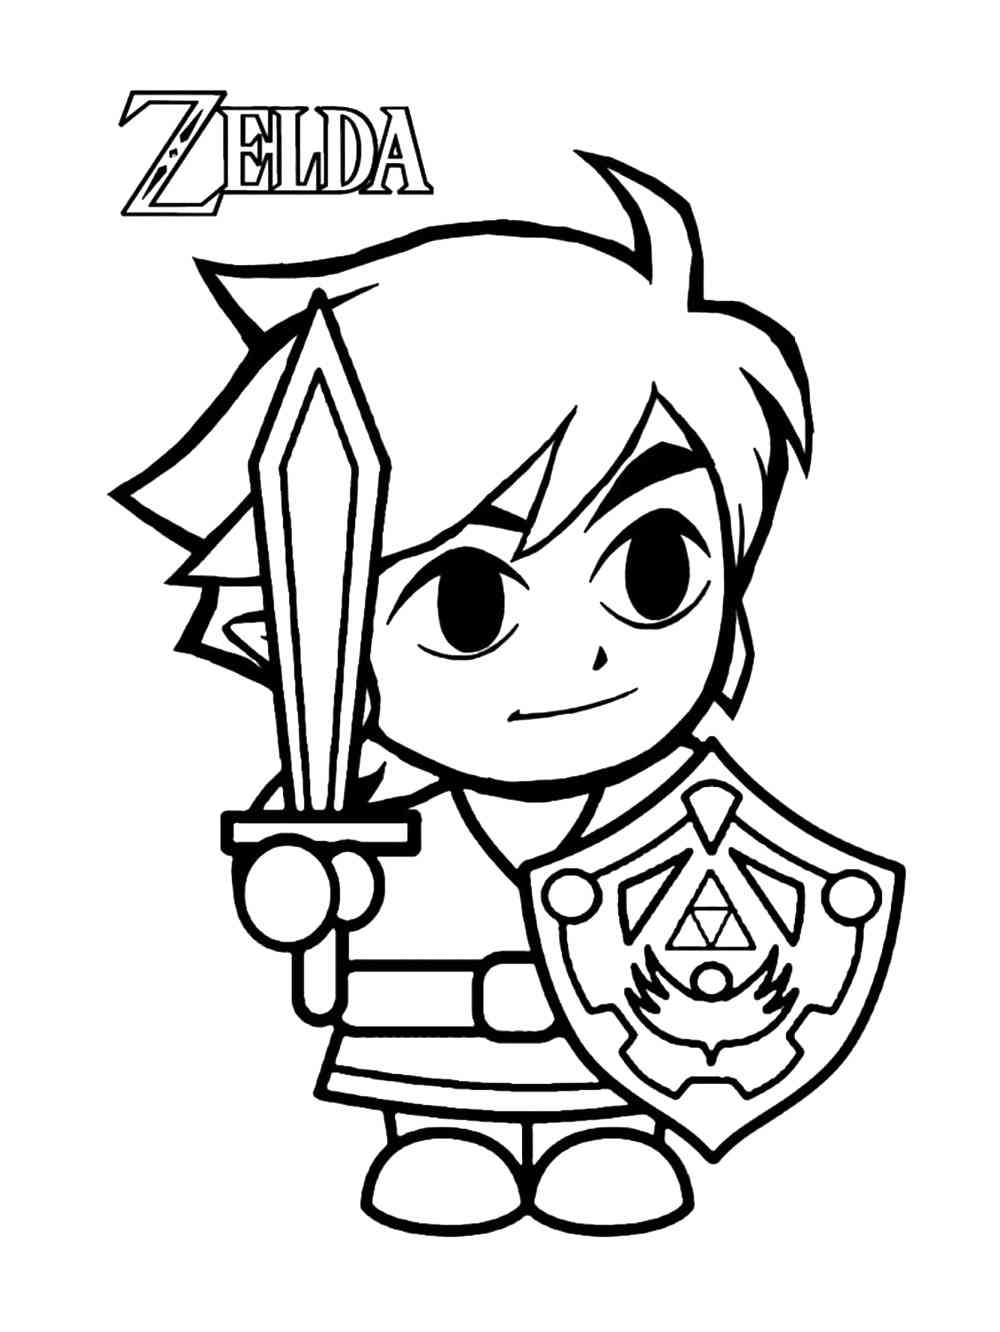 Chibi Link from The Legend Of Zelda coloring page